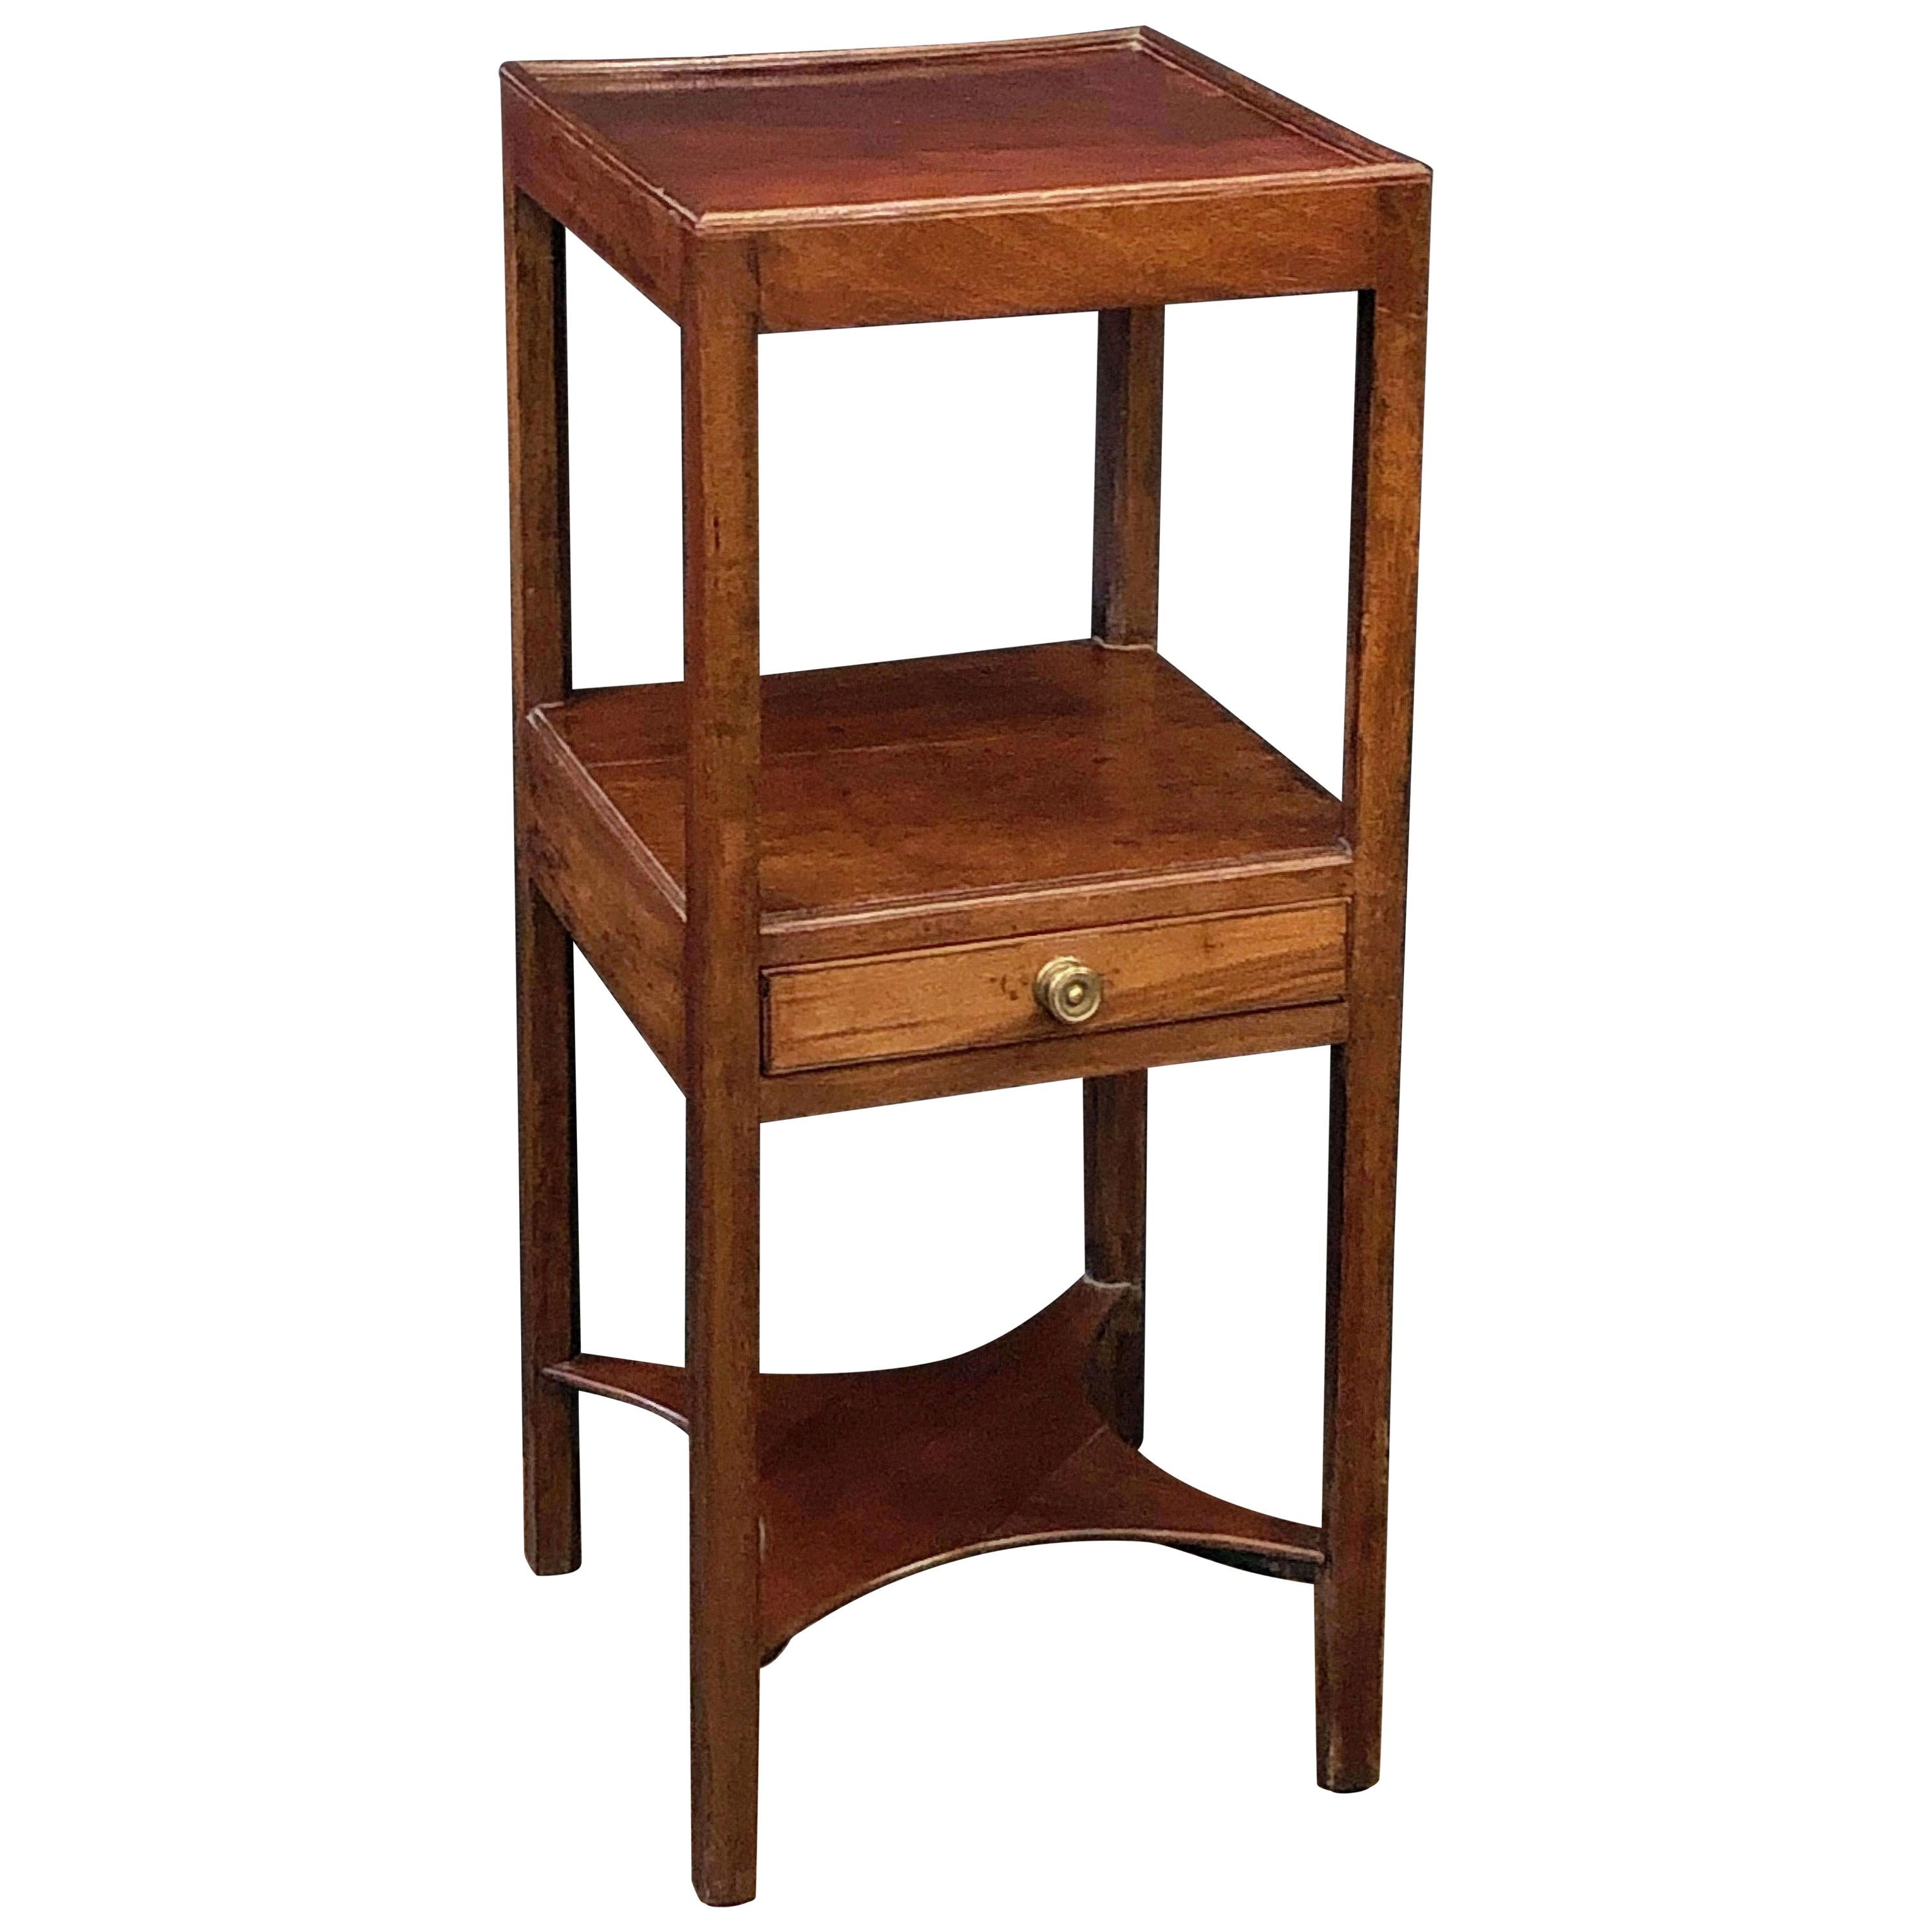 English Nightstand or Bedside Table of Mahogany with One Drawer